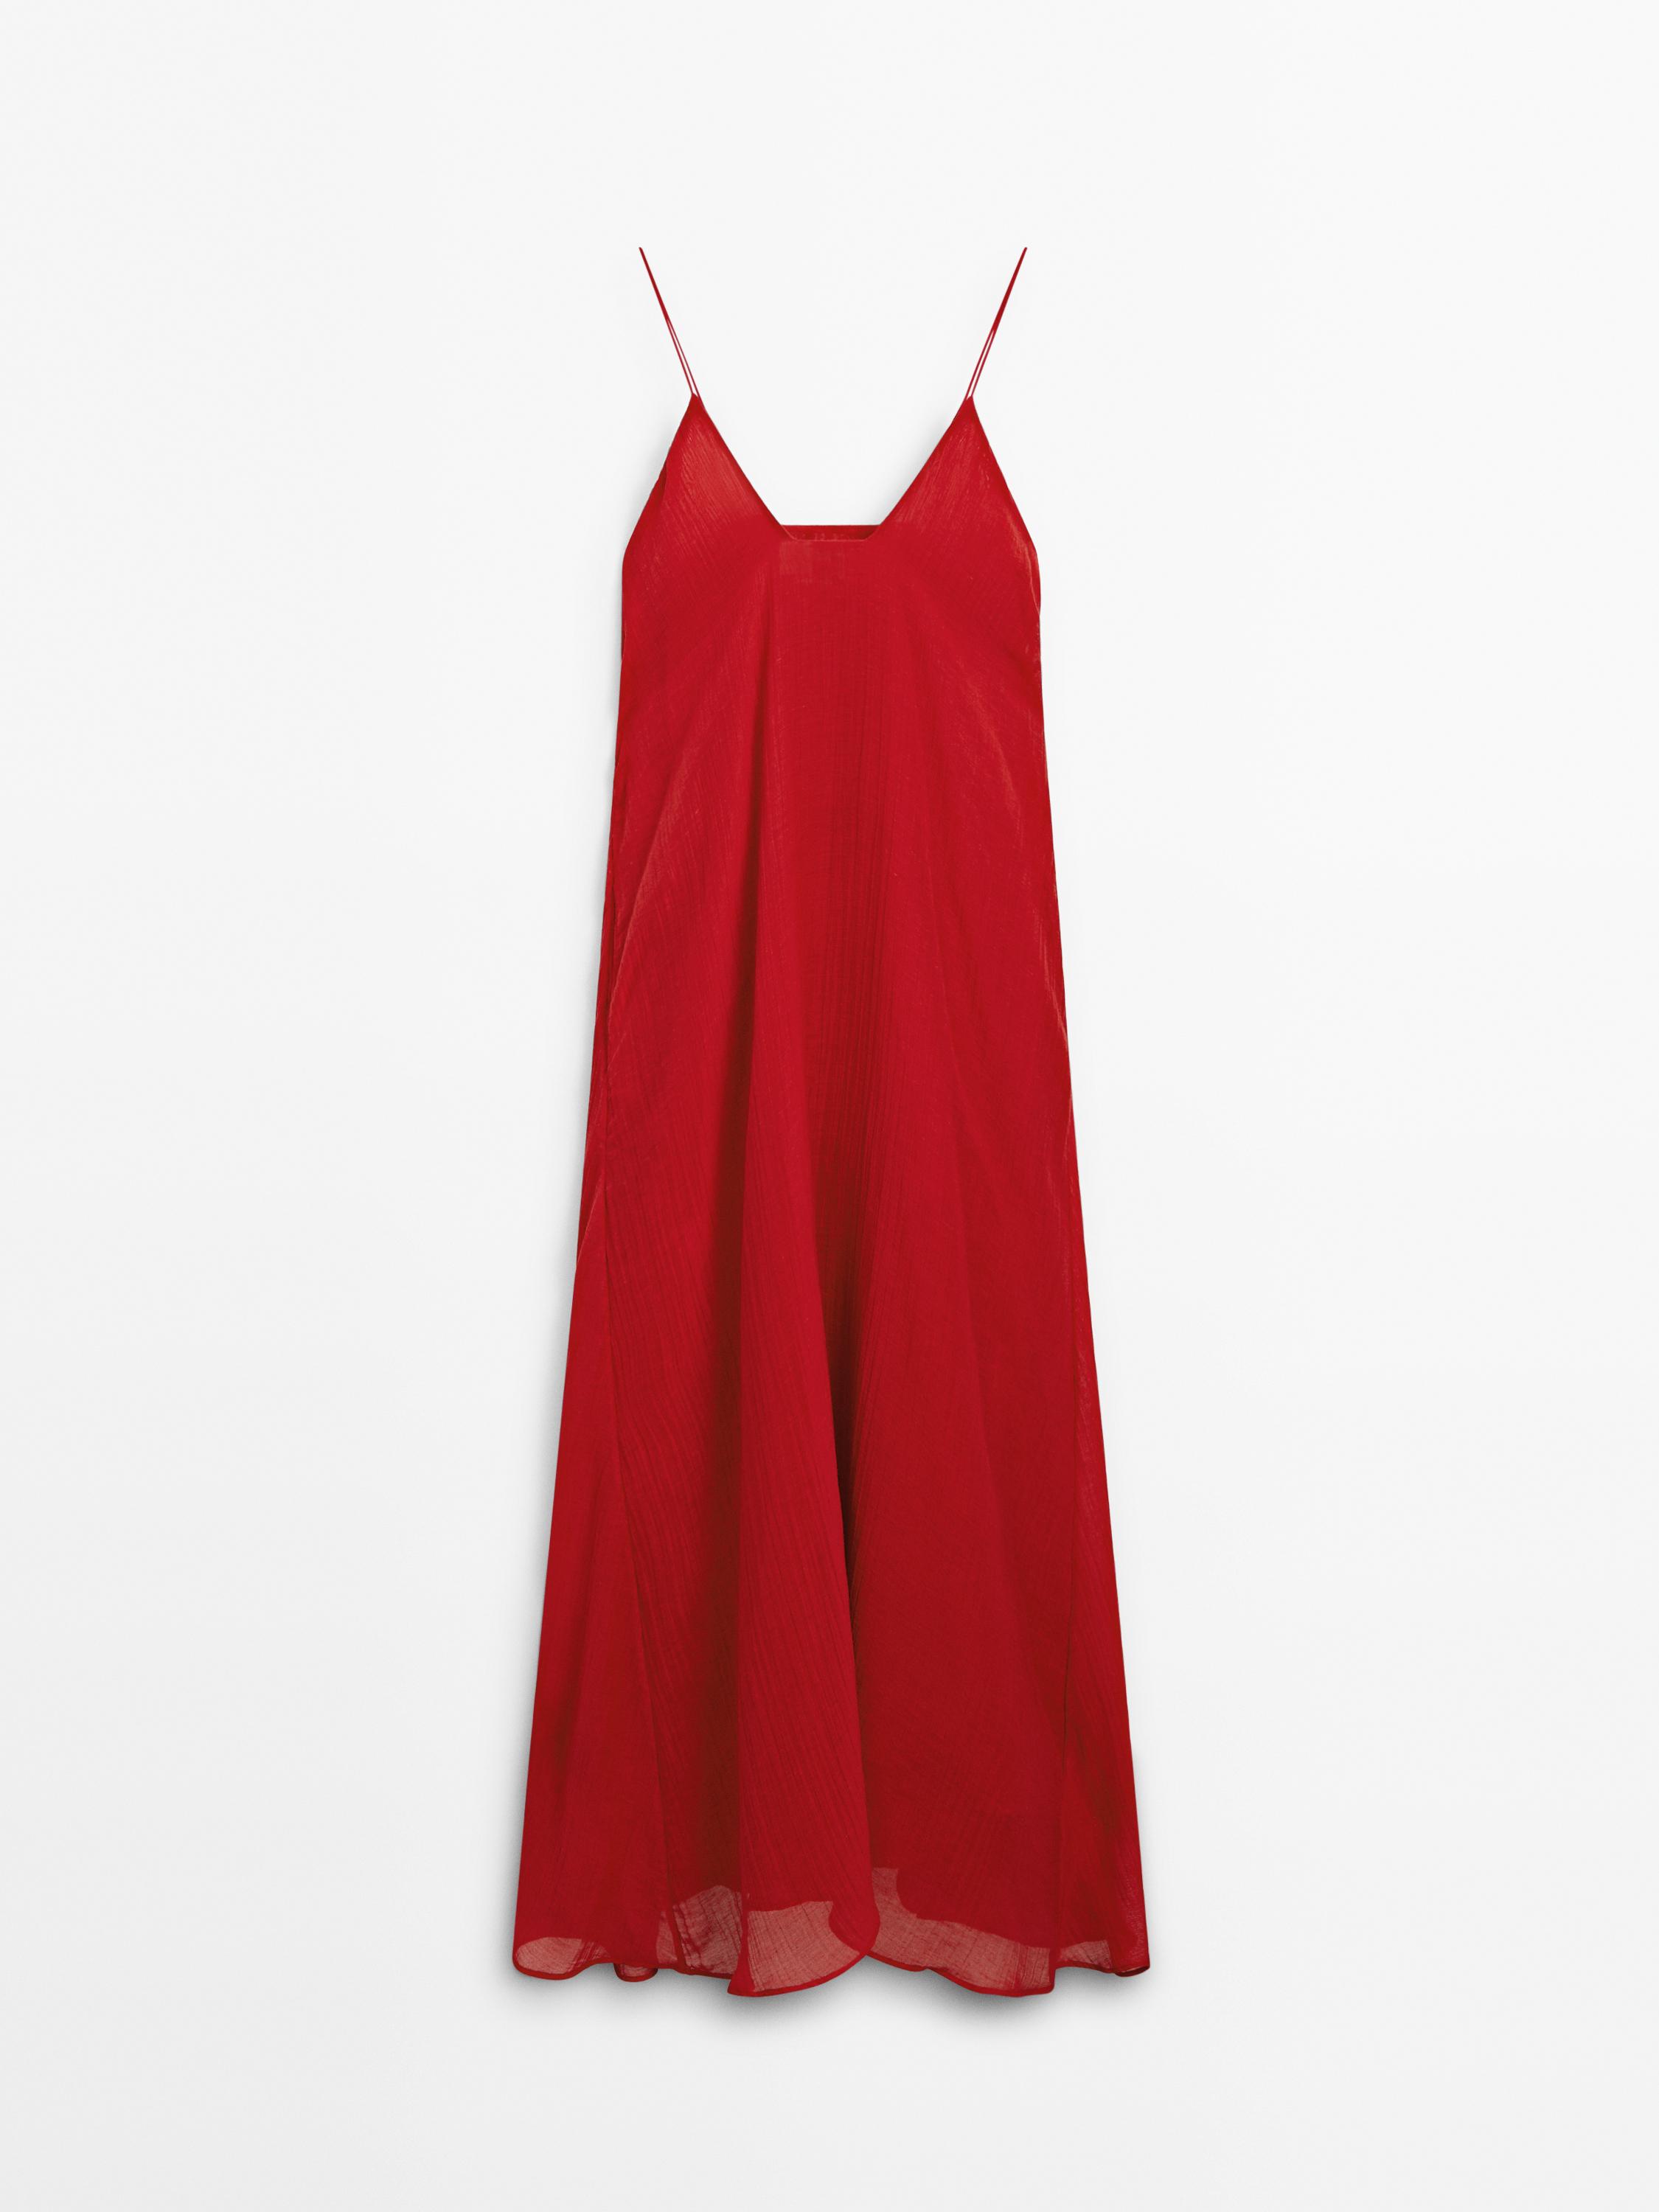 Long strappy dress with neckline detail - Limited Edition - Red 